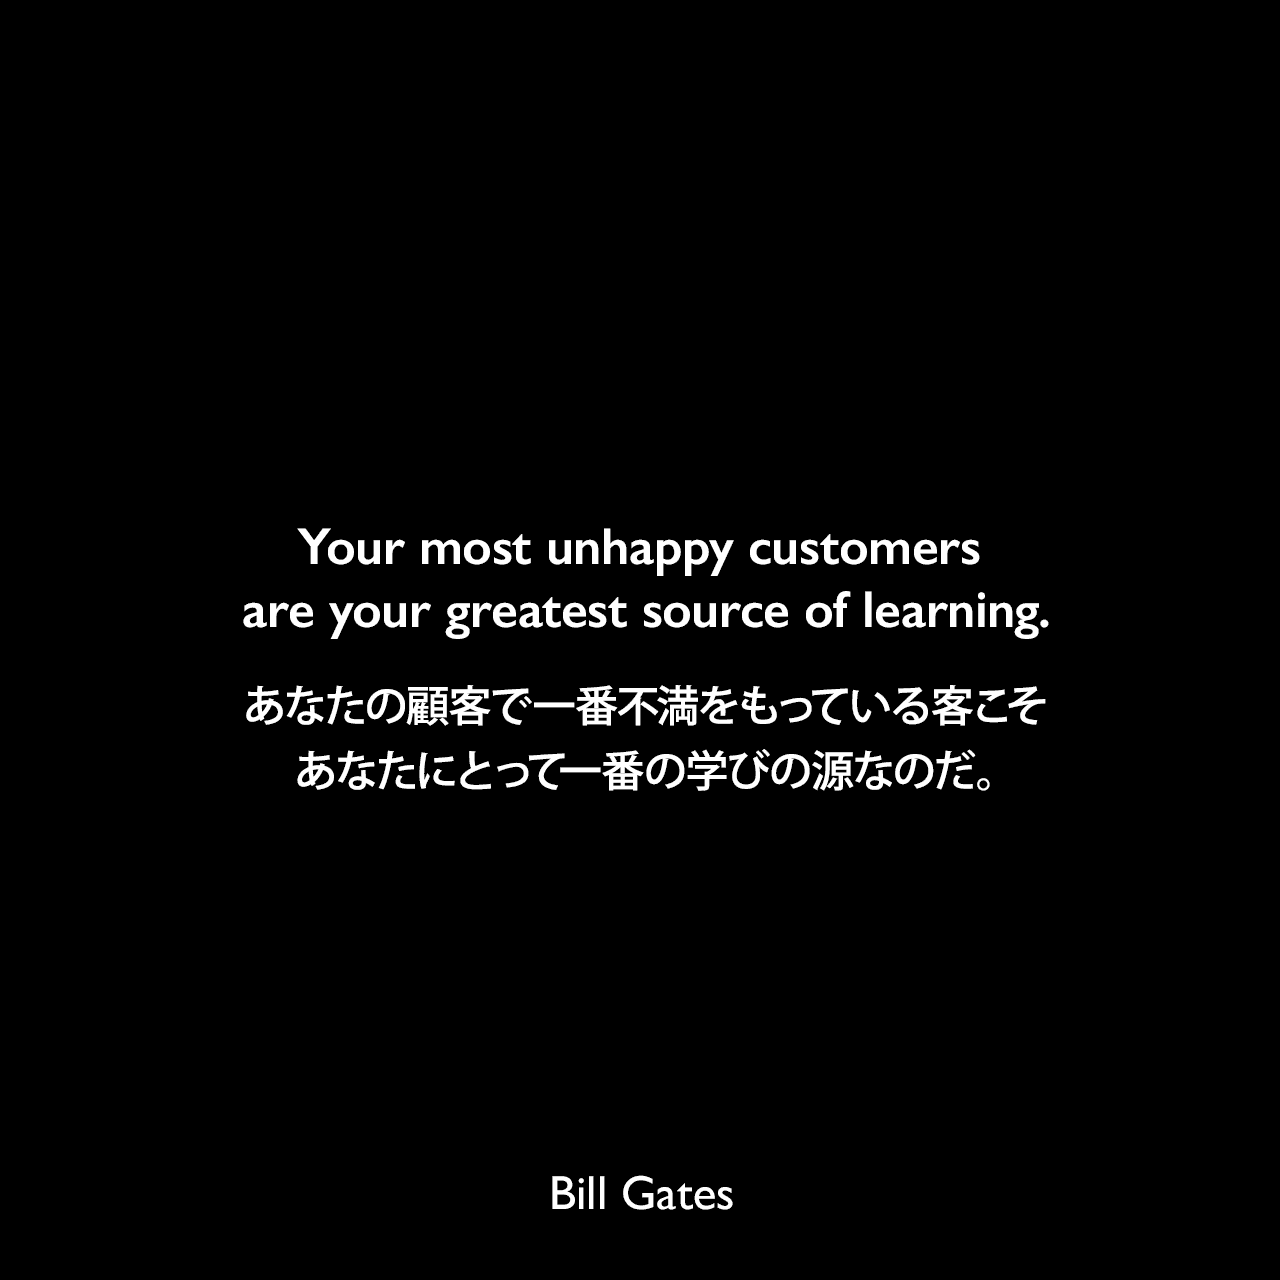 Your most unhappy customers are your greatest source of learning.あなたの顧客で一番不満をもっている客こそ、あなたにとって一番の学びの源なのだ。Bill Gates